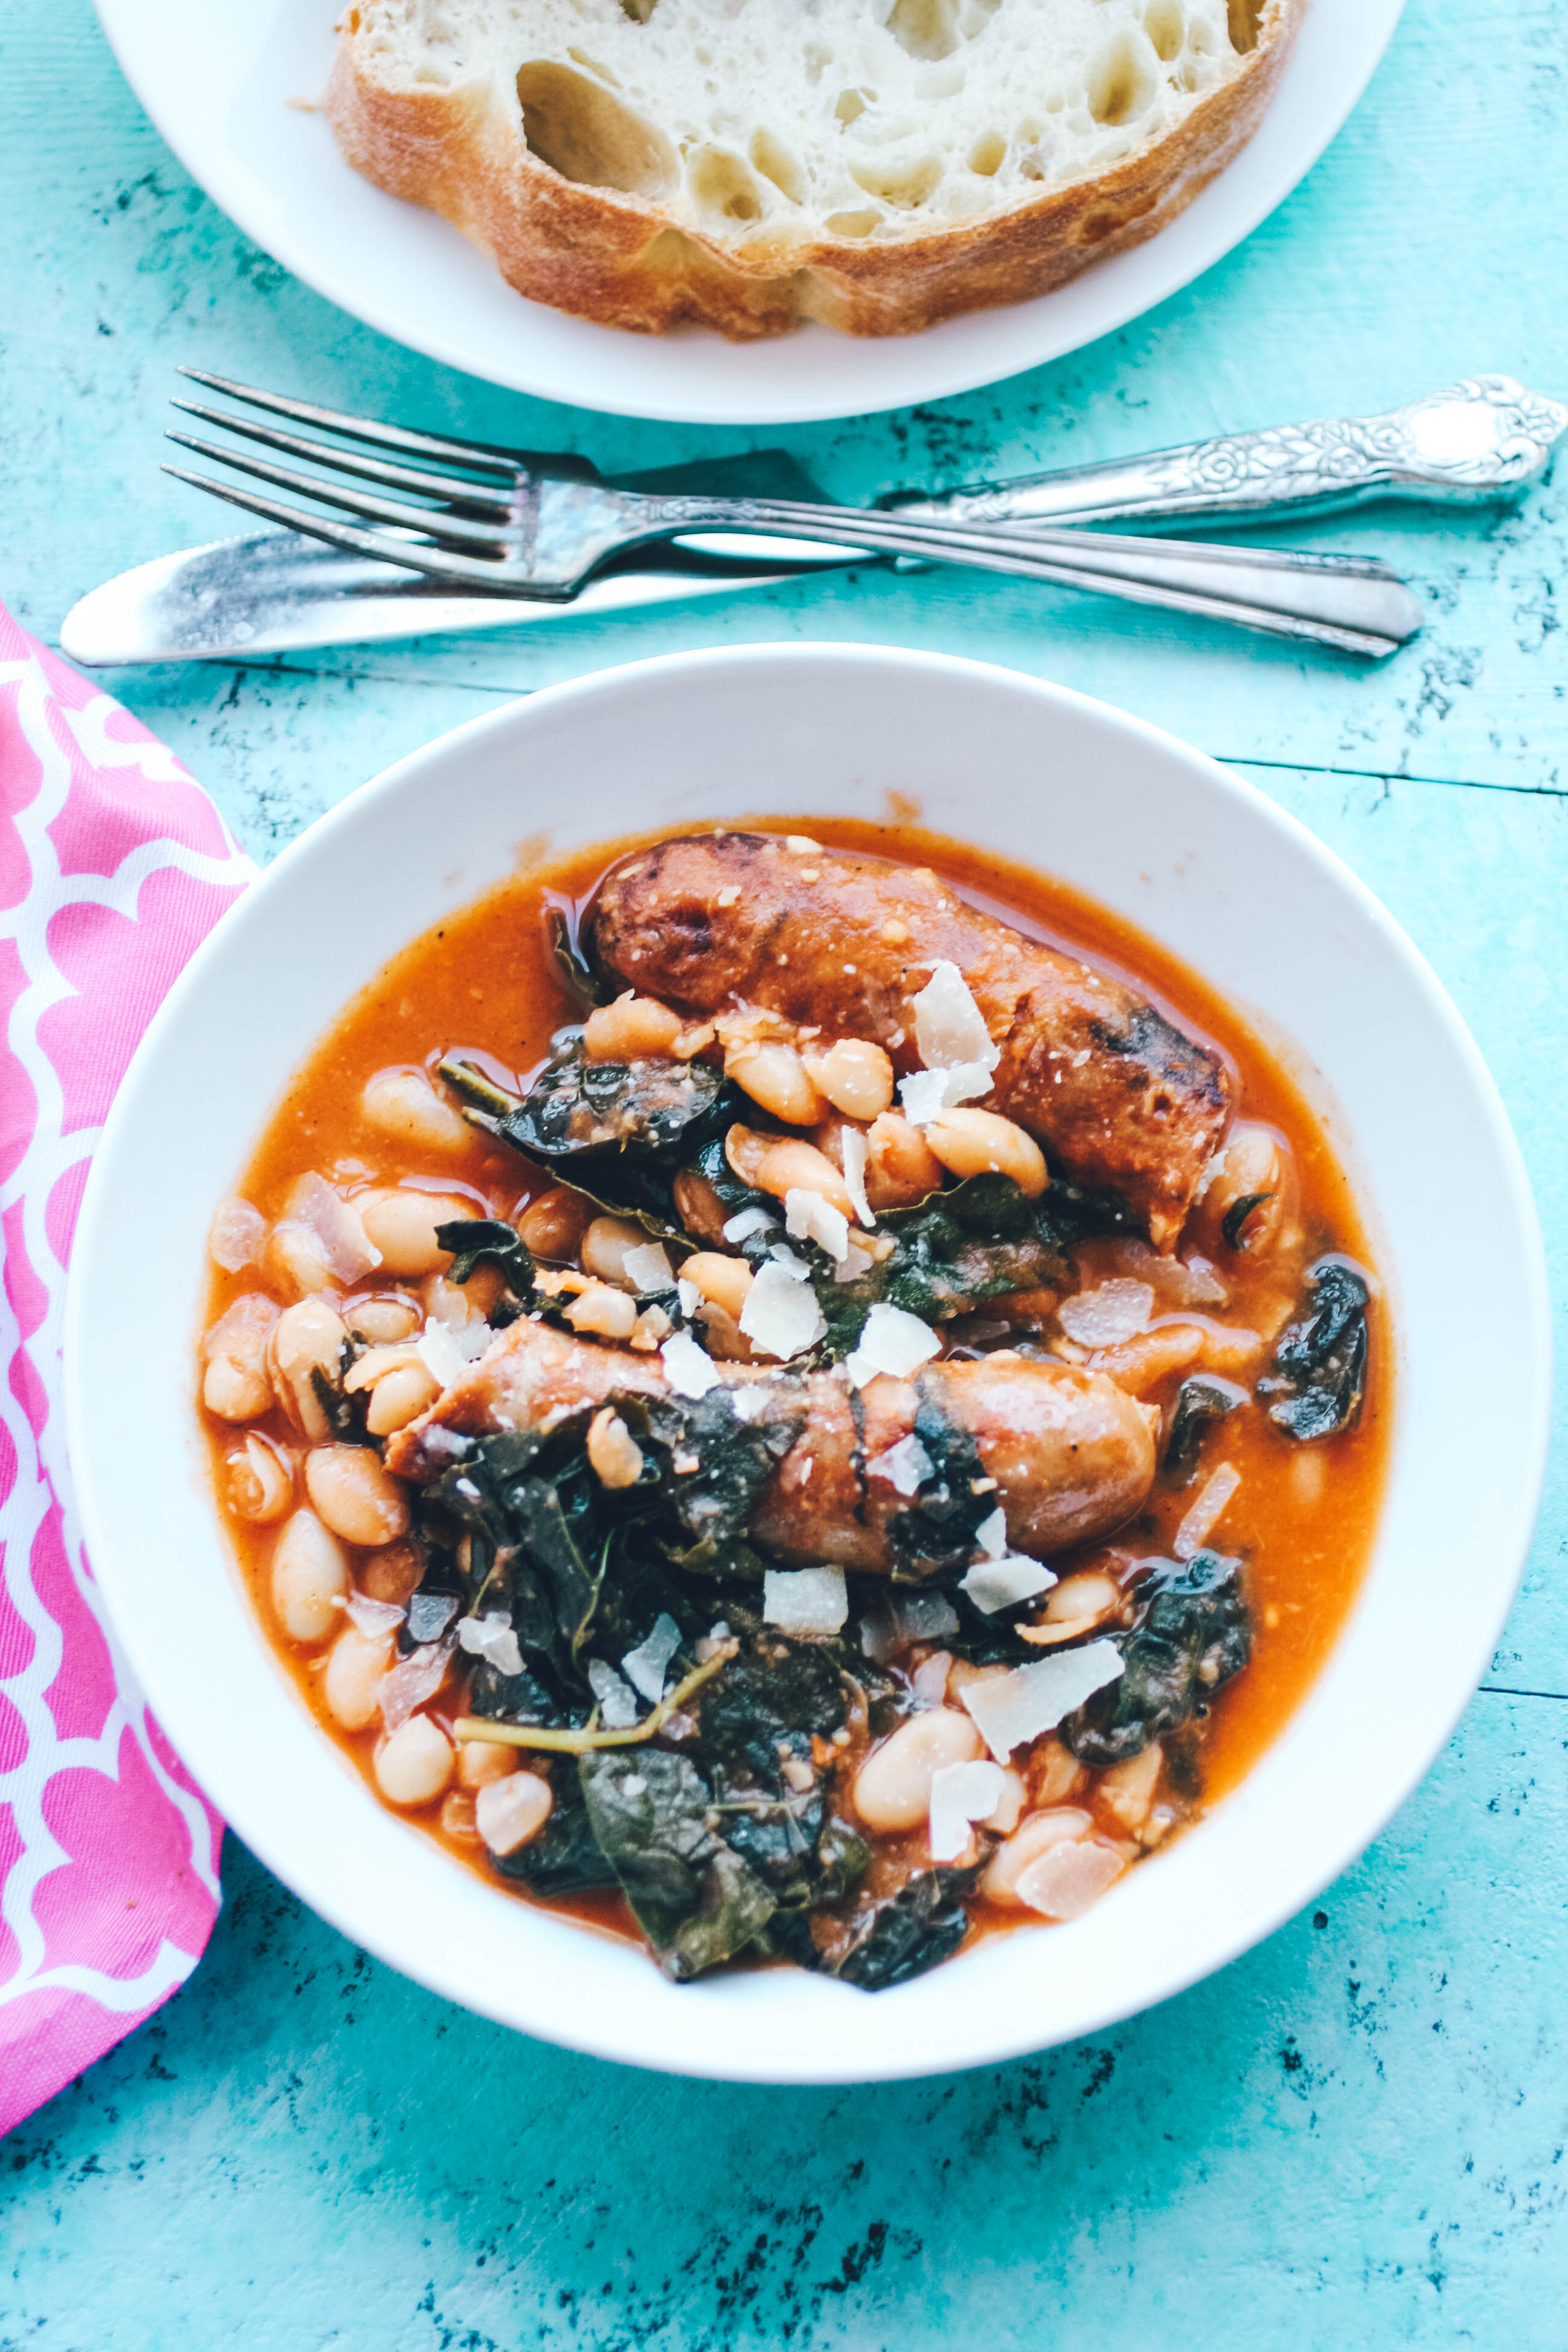 Have bread on hand to enjoy this Beans and Greens and Sausage dish! You'll adore this Beans and Greens and Sausage dish for any meal.